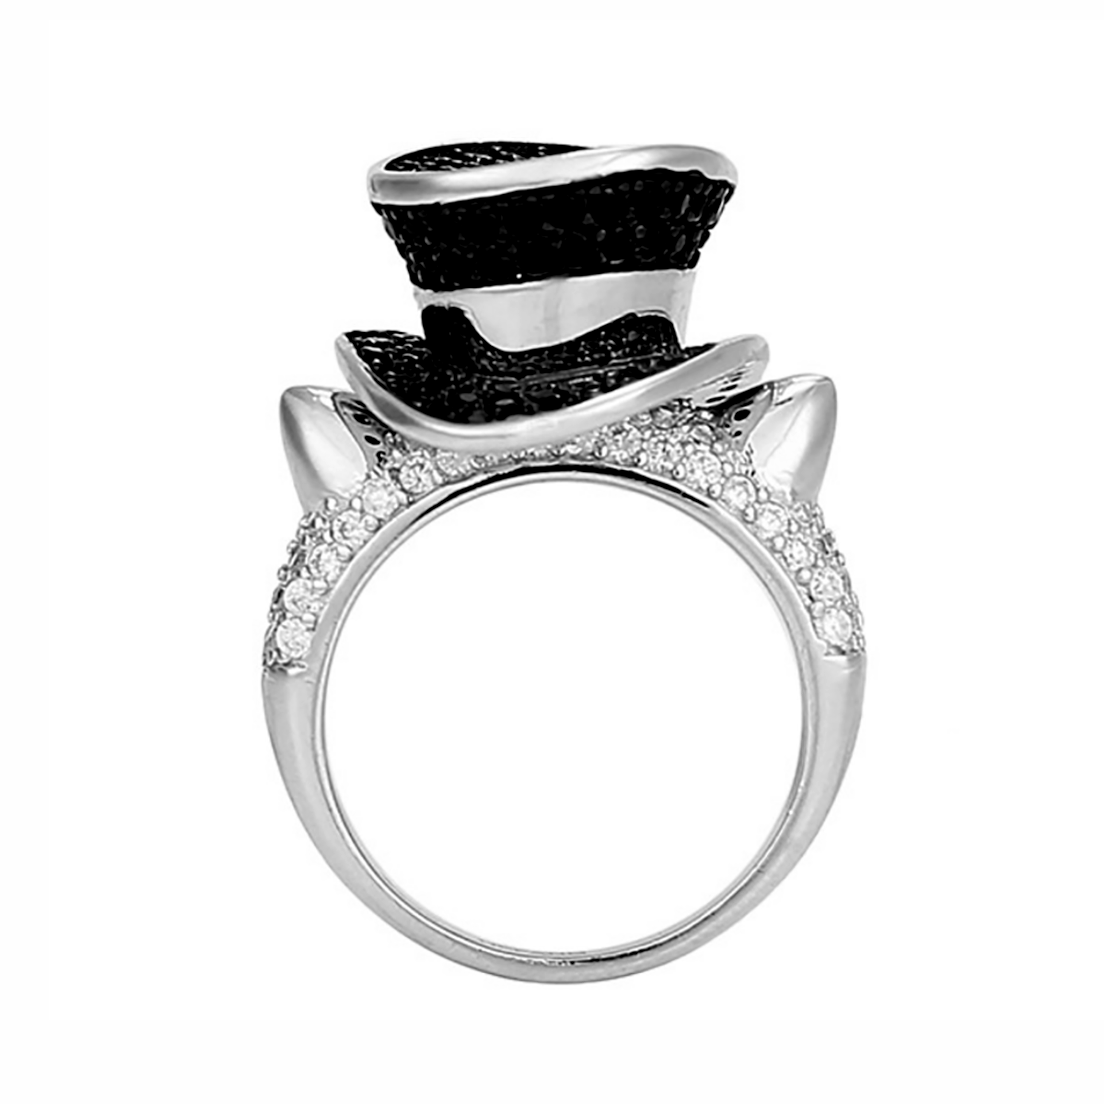 Tophat Cat Statement Ring Black Cz Plated Girls Ginger Lyne Collection - 8